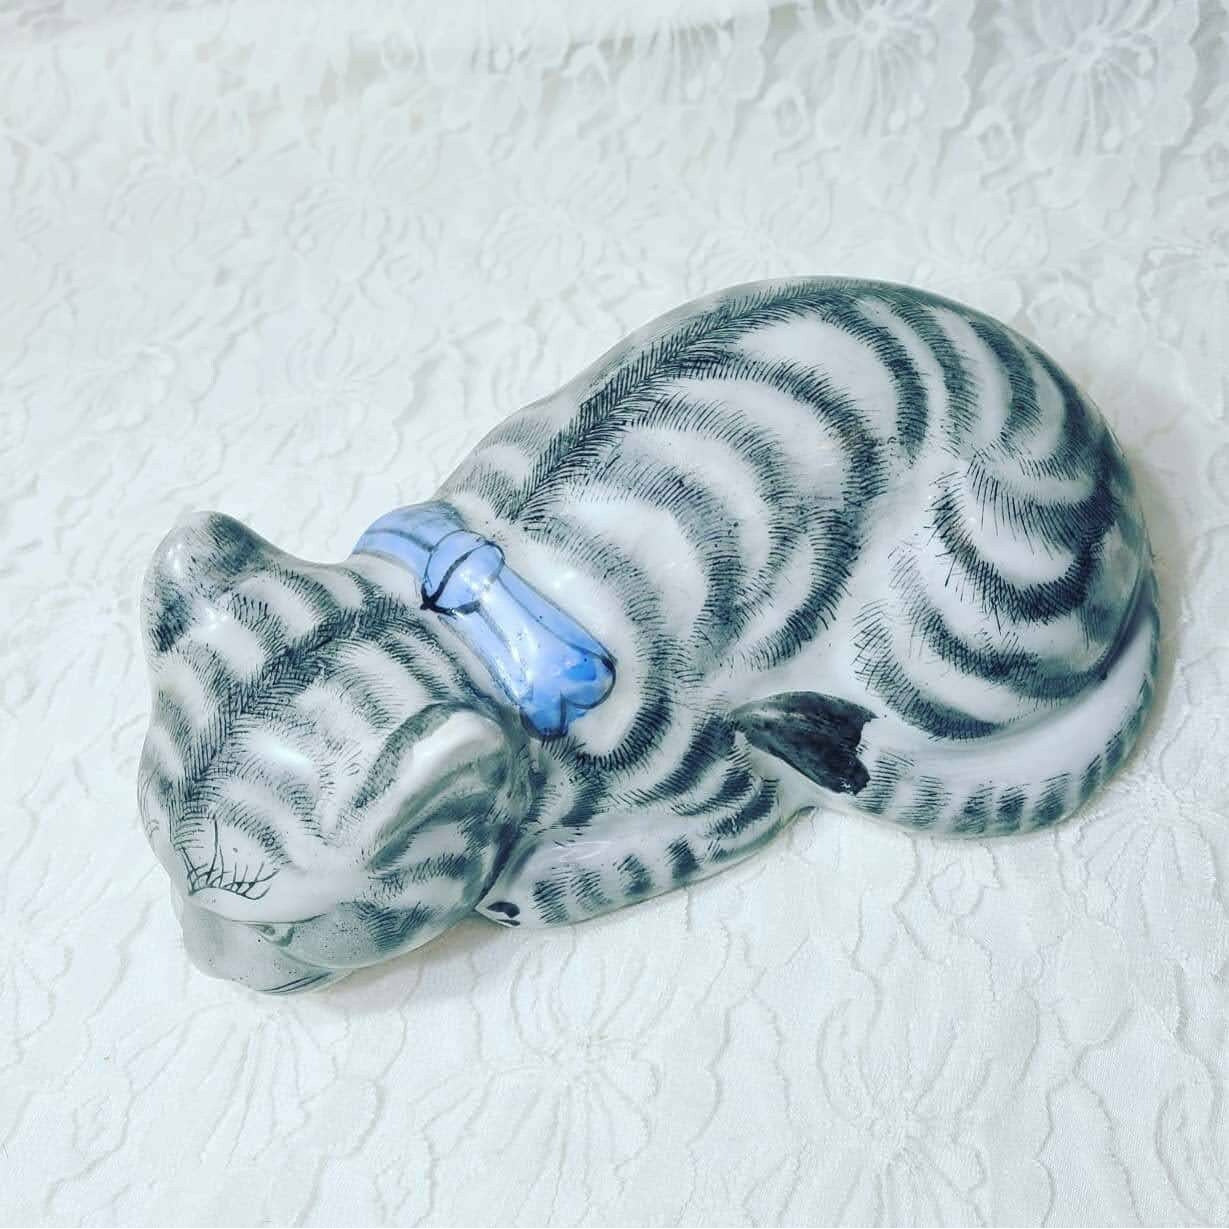 Porcelain Striped CAT Statue Figurine ~ Intricate Hand Painted Chinese Chinoiseries Sleepy Cat Ceramic Figure Soft Grey Colors ~ 8.25" x 3.5"